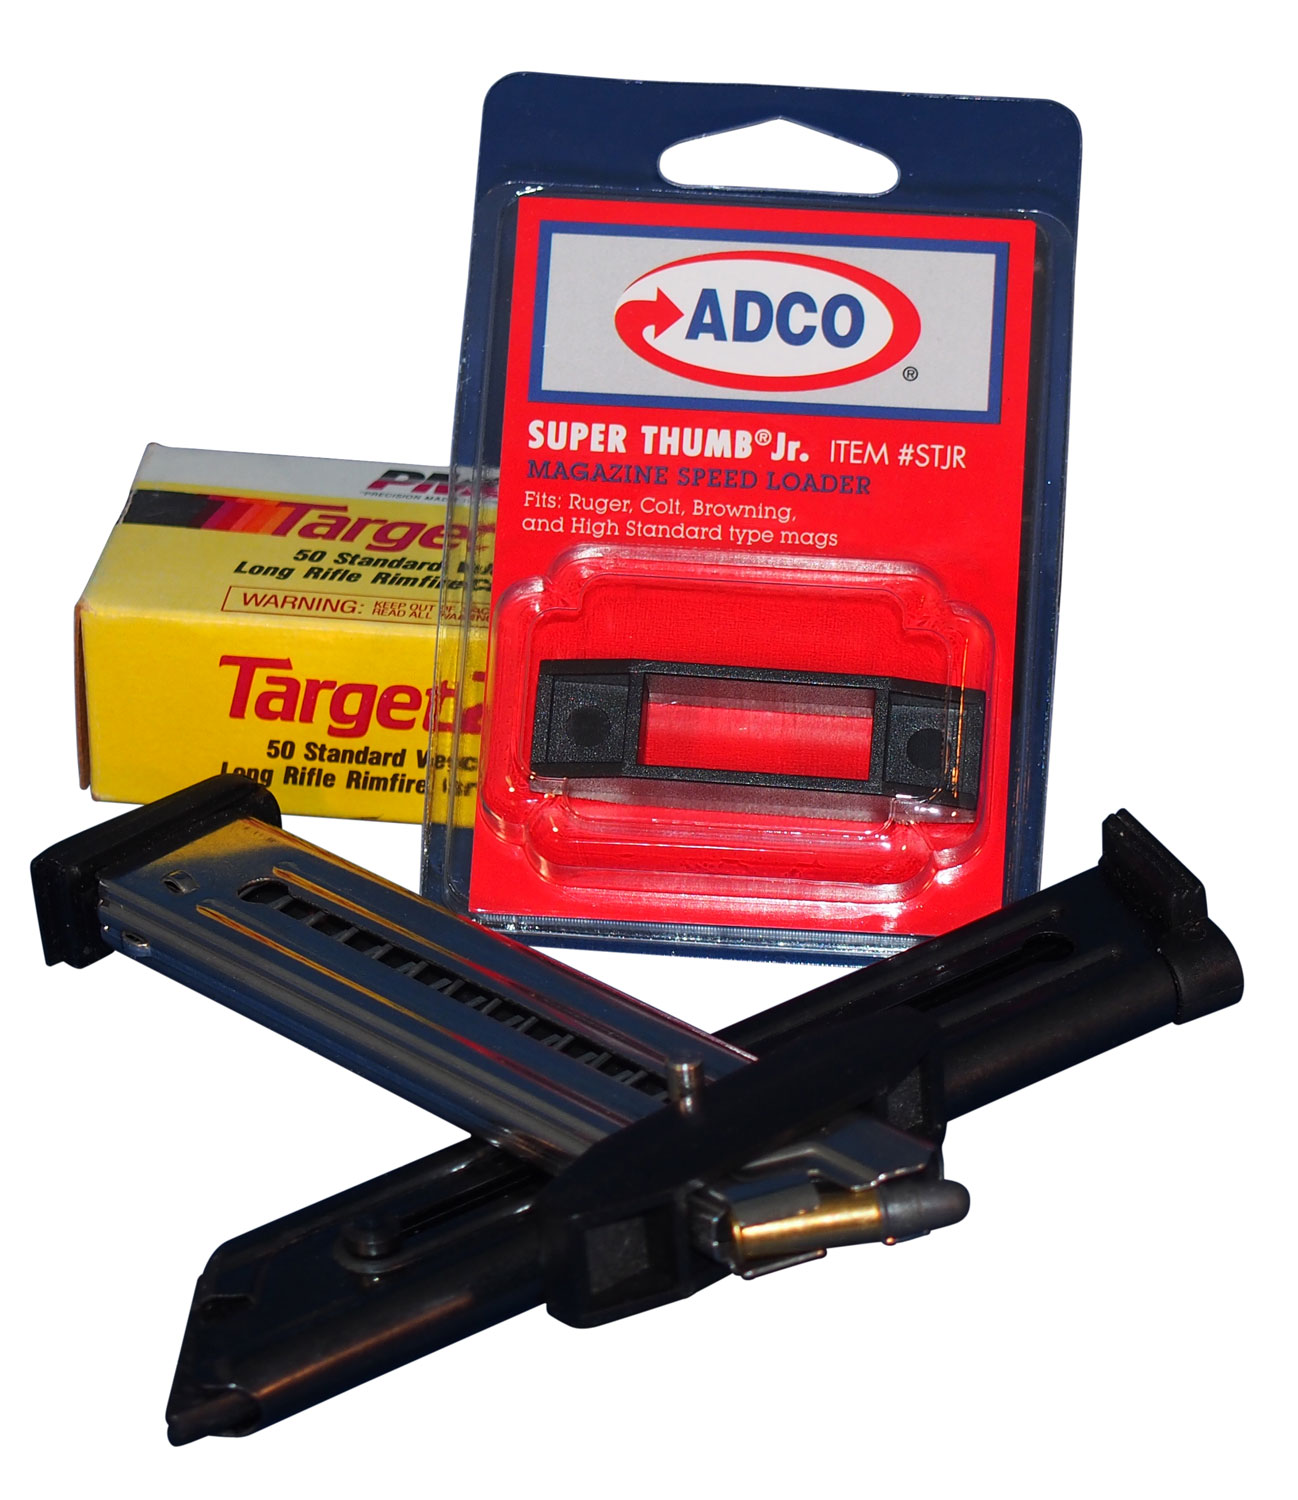 ADCO STJR Super Thumb JR Mag Loader Fits .22 Caliber Target Pistols From Ruger, Colt, Browning, High Standard, S&W 22A/S & Beretta U22 Neos